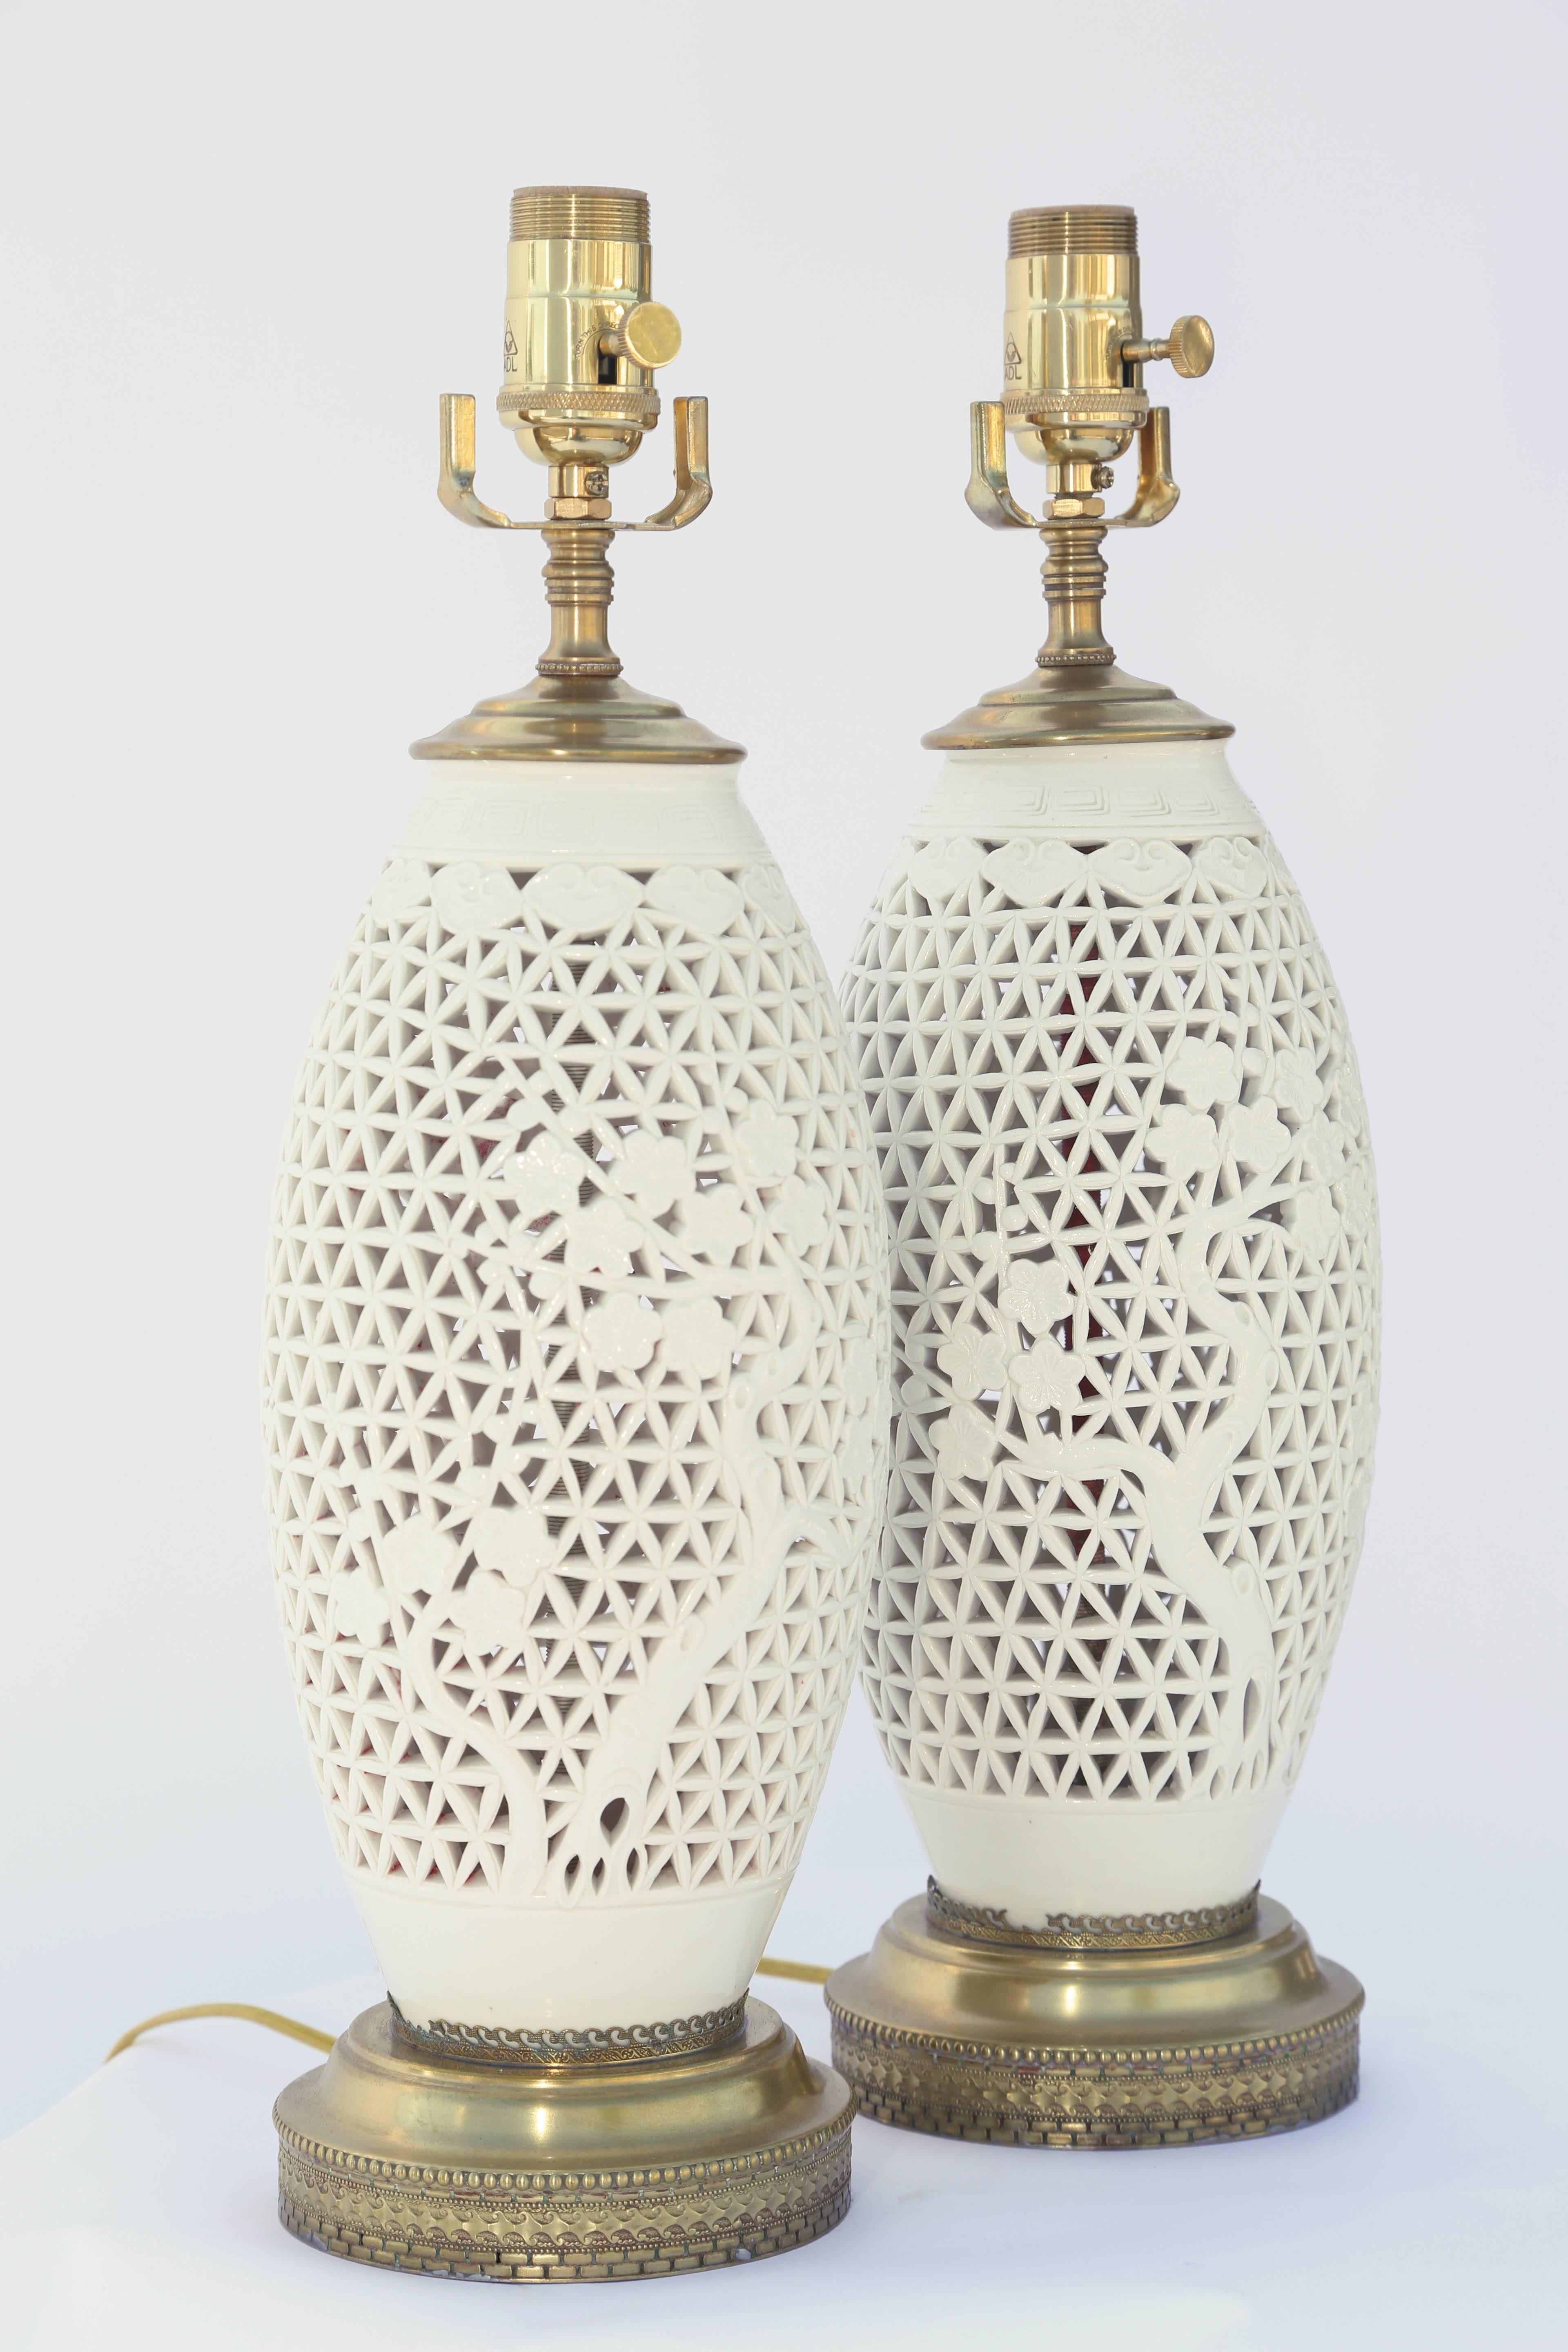 Pair of lamps, each a blanc de chine piercework porcelain vase, its ovoid body decorated with blooming trees, lamped on brass bases.

Stock ID: D9433